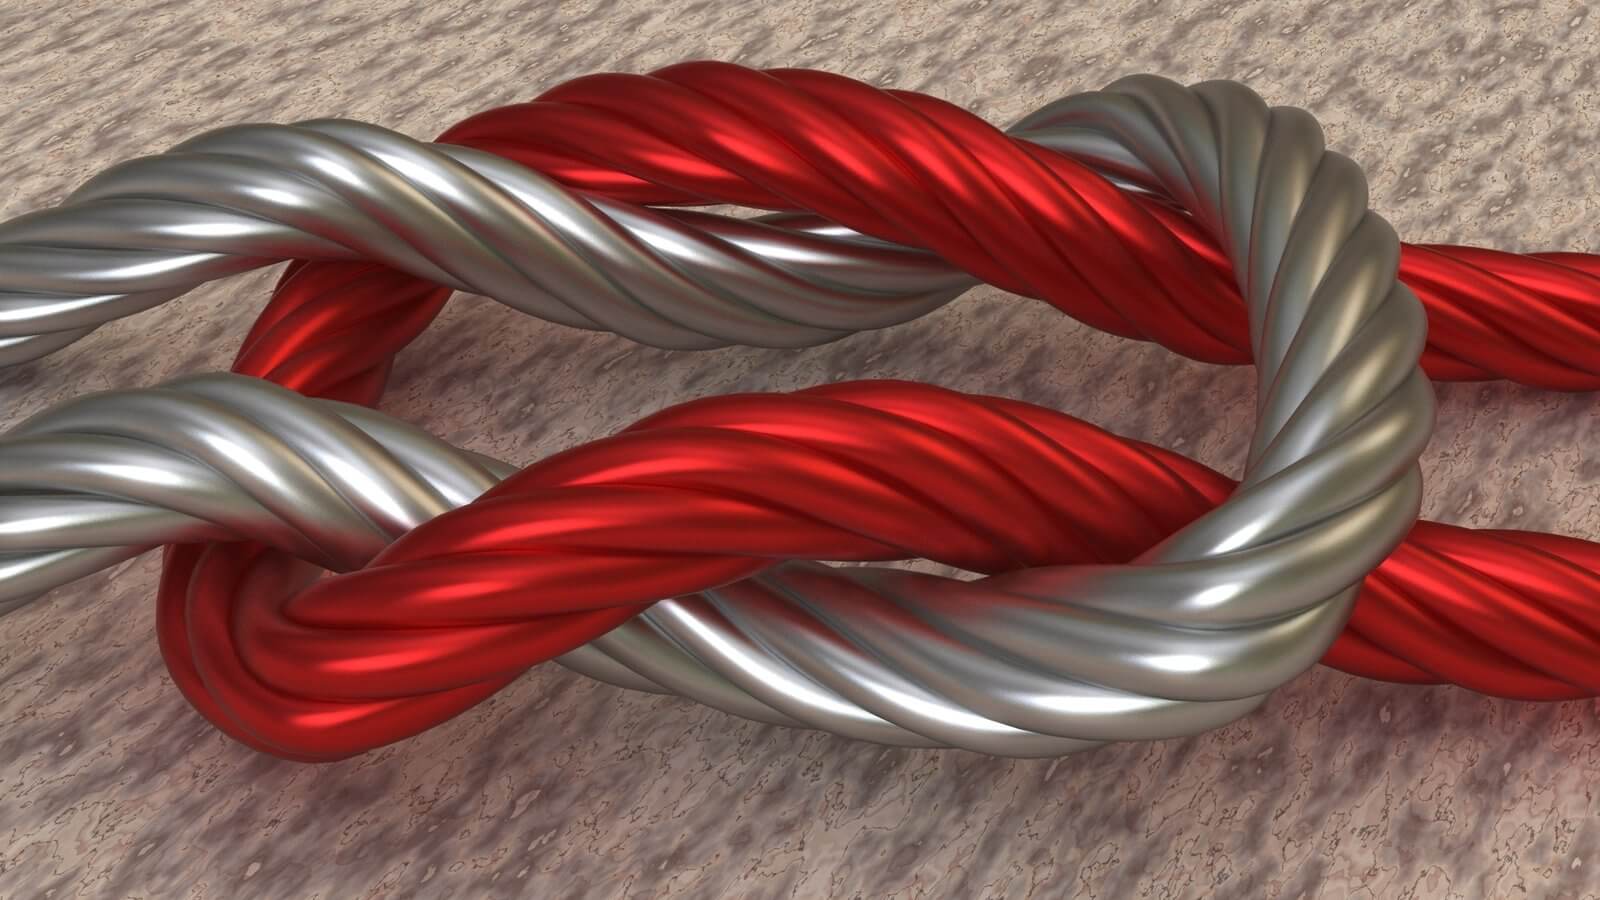 A header image of two iron cables binded in a knot